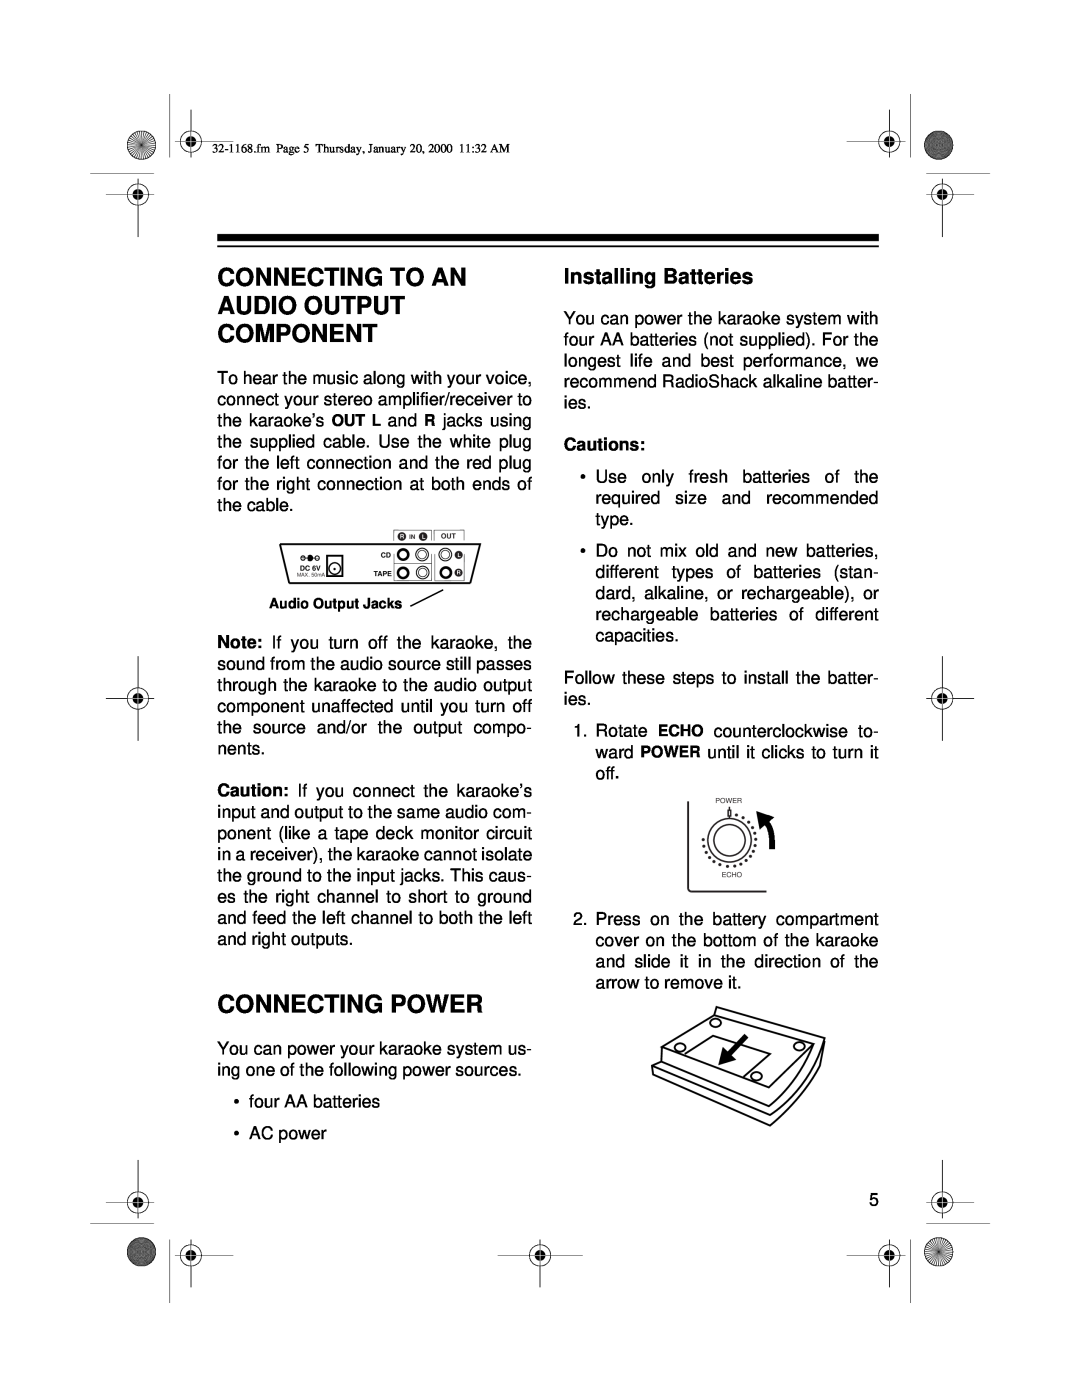 Optimus 32-1168 owner manual Connecting To An Audio Output Component, Connecting Power, Installing Batteries 